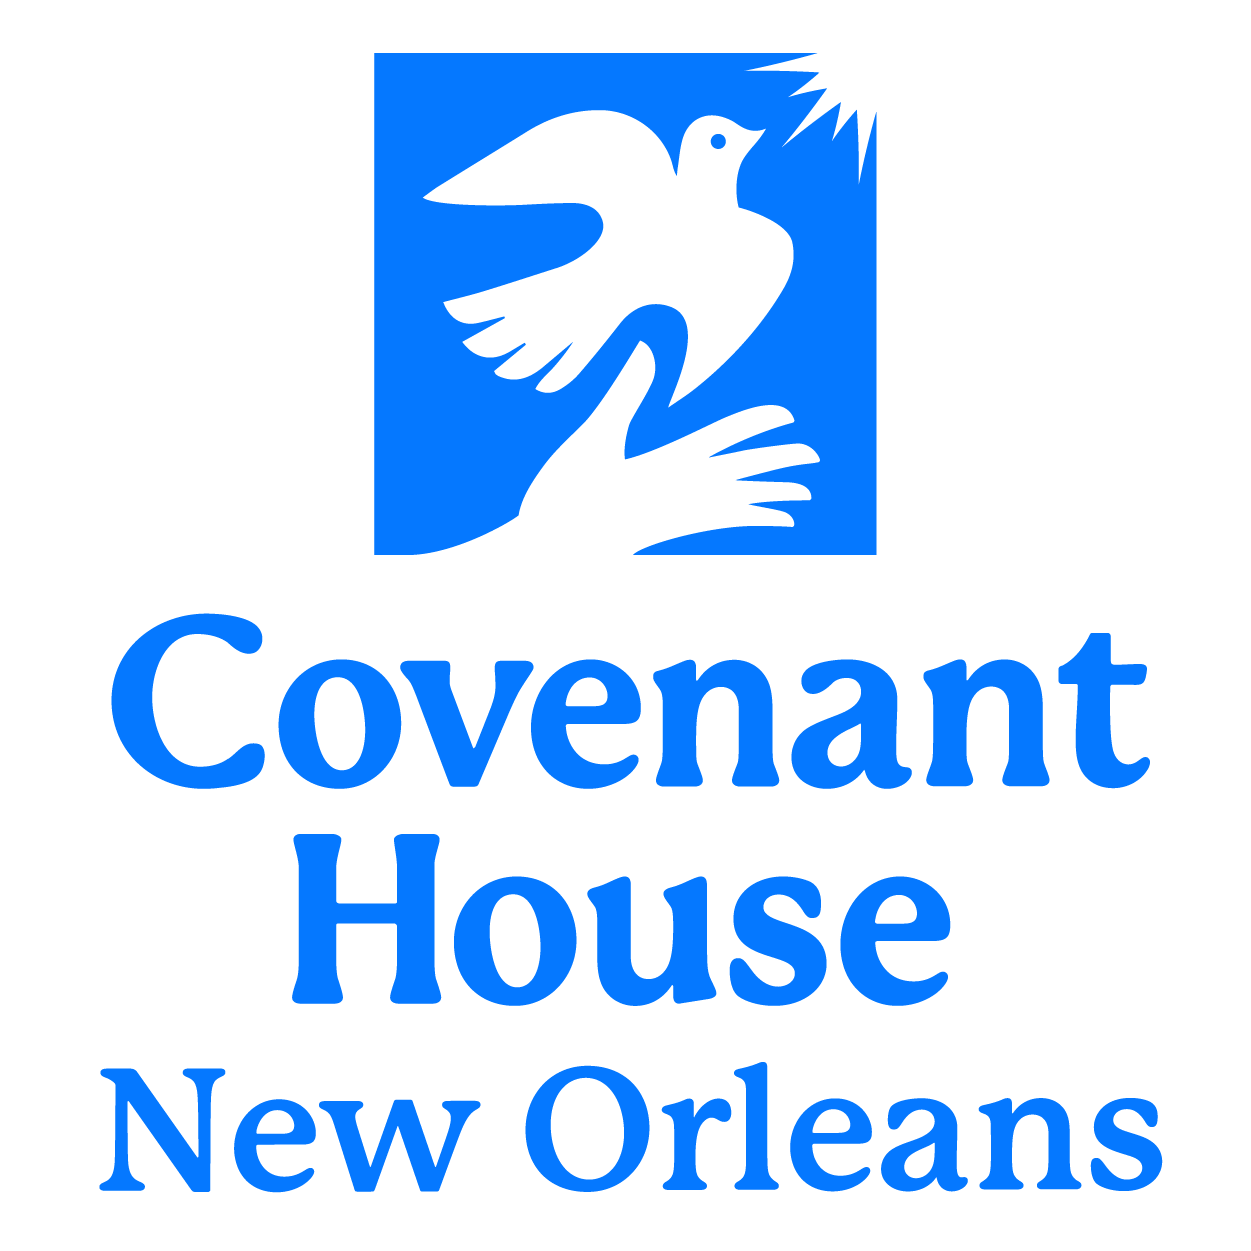 Covenant House Helps Youth in Need Overcome Homelessness